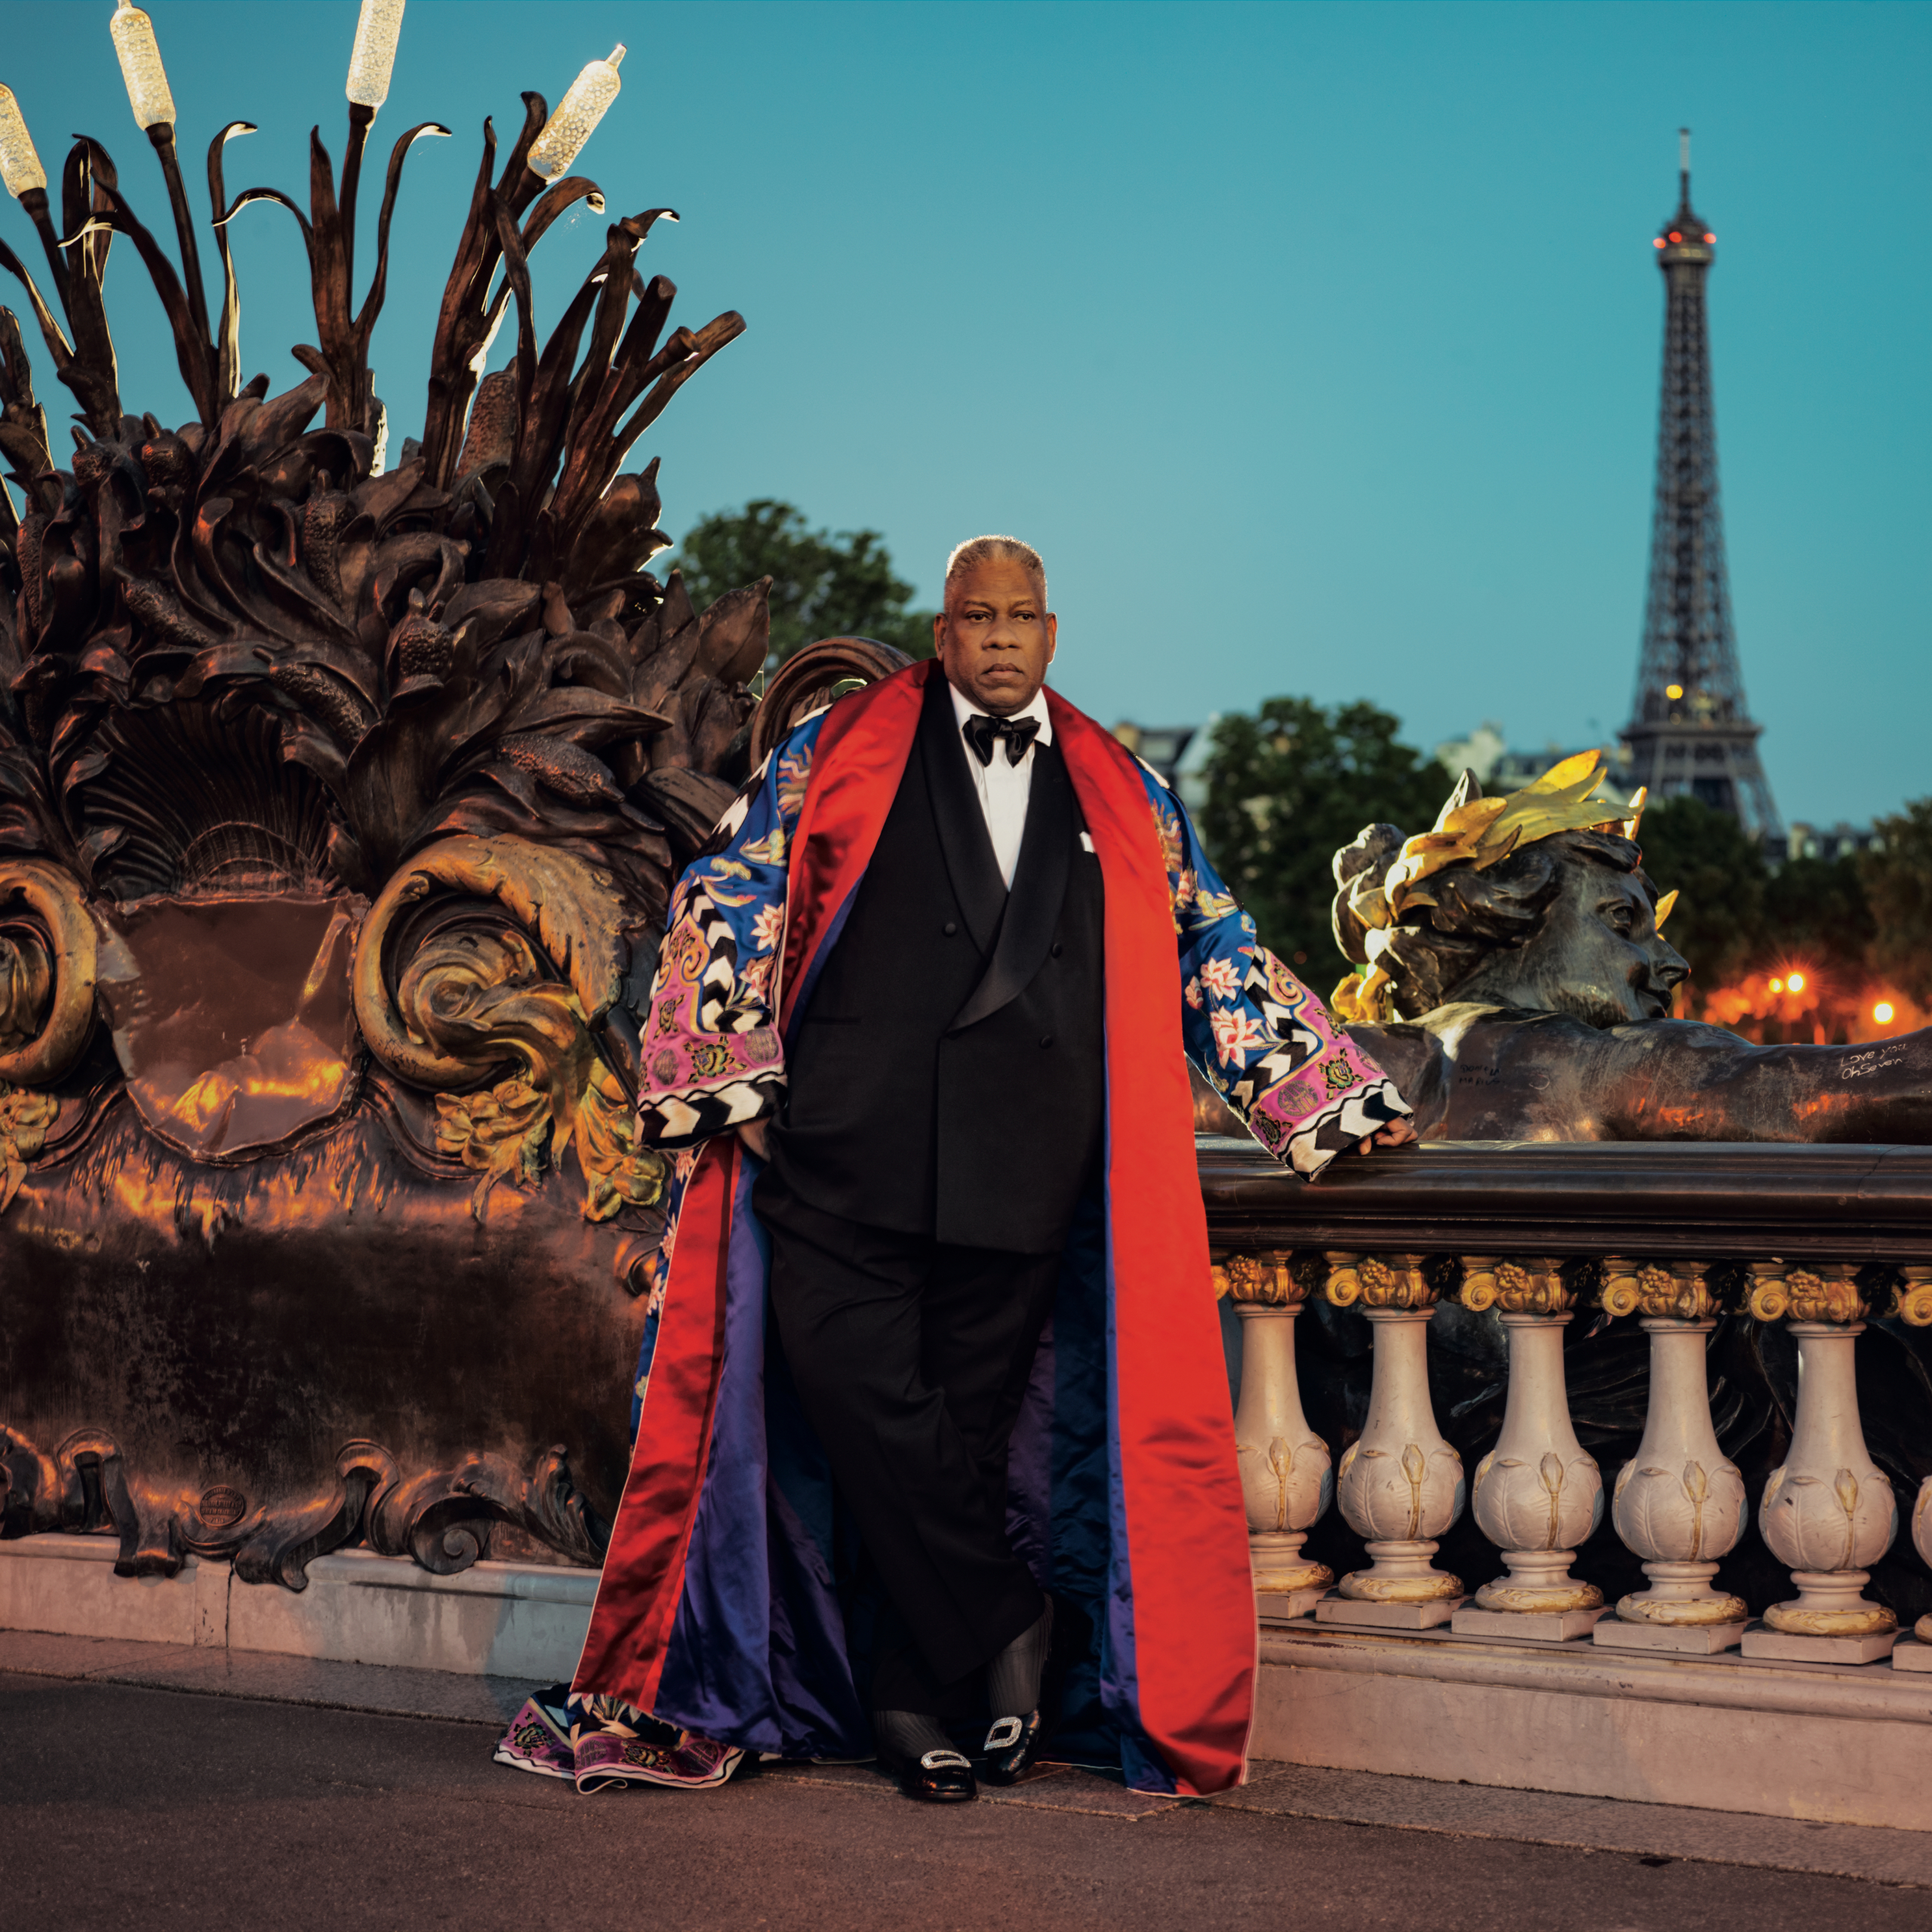 André Leon Talley on Galliano, McQueen, and Lagerfeld, Darling